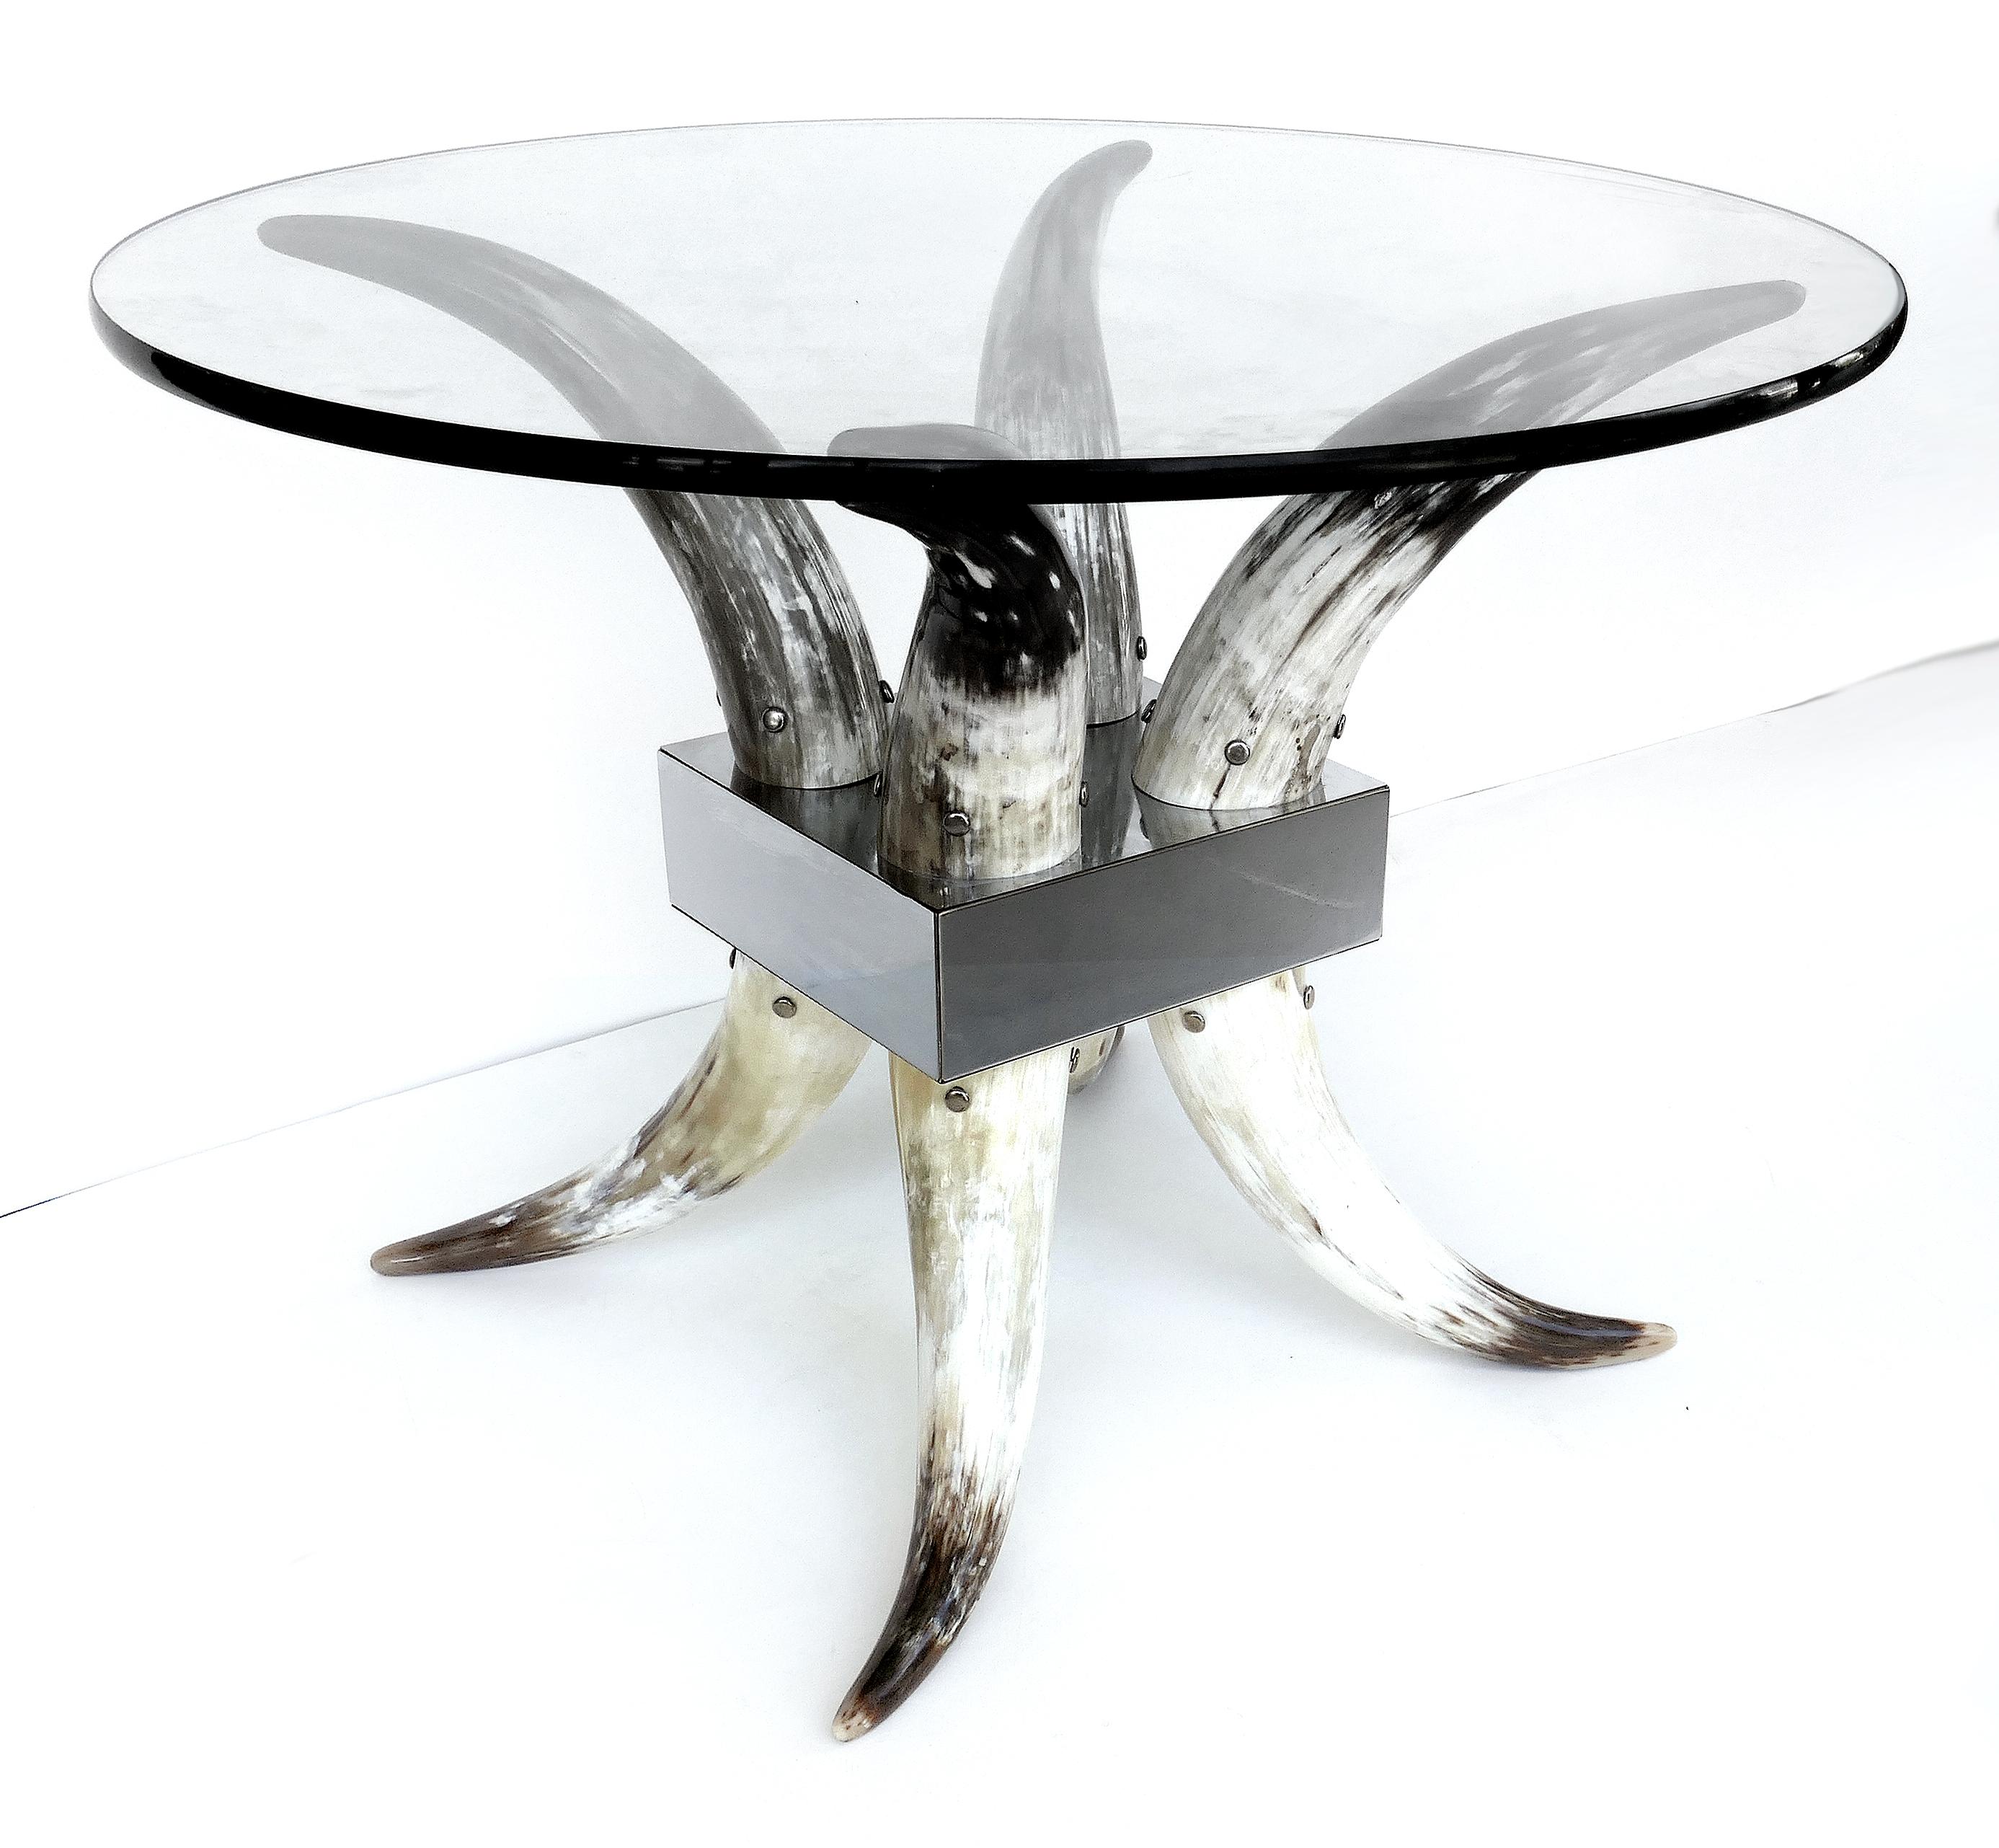 Offered for sale is an elegant modern steer horn, stainless steel and glass center table. This table can support a 60